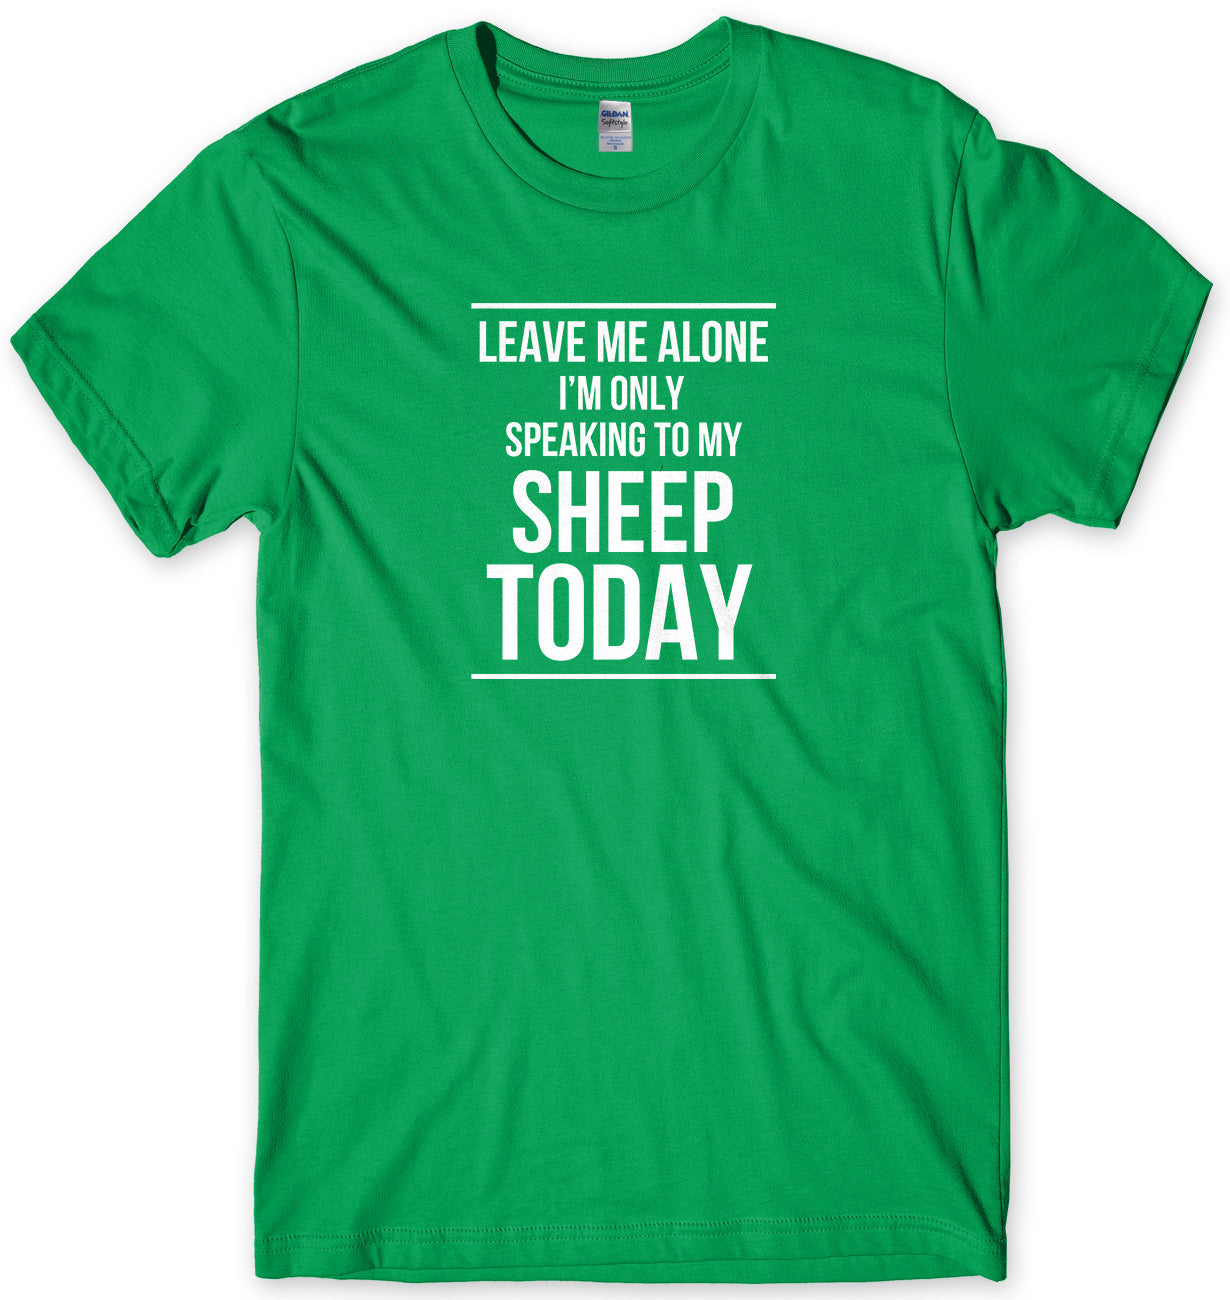 LEAVE ME ALONE I'M ONLY SPEAKING TO MY SHEEP TODAY MENS FUNNY SLOGAN UNISEX T-SHIRT